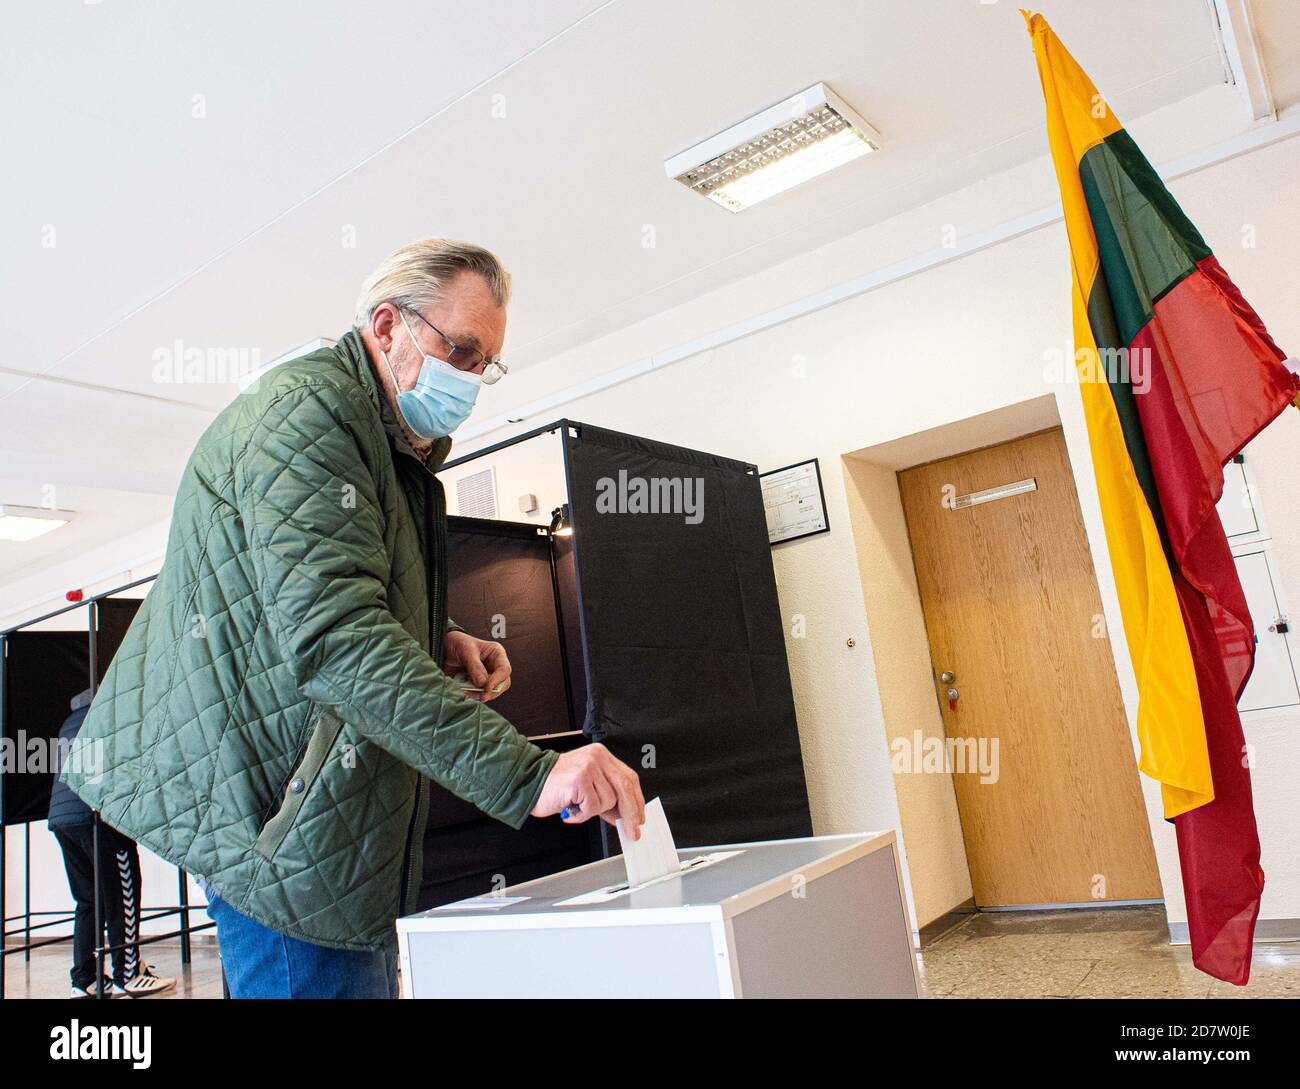 Vilnius, Lithuania. 25th Oct, 2020. A voter casts his ballot in a polling station for the parliament elections in Vilnius, Lithuania, Oct. 25, 2020. Lithuania held the second round of parliamentary elections Sunday to elect 68 members of the 141-seat unicameral parliament, or the Seimas, whose 73 other members have been elected in the first round on Oct. 11. Credit: Alfredas Pliadis/Xinhua/Alamy Live News Stock Photo